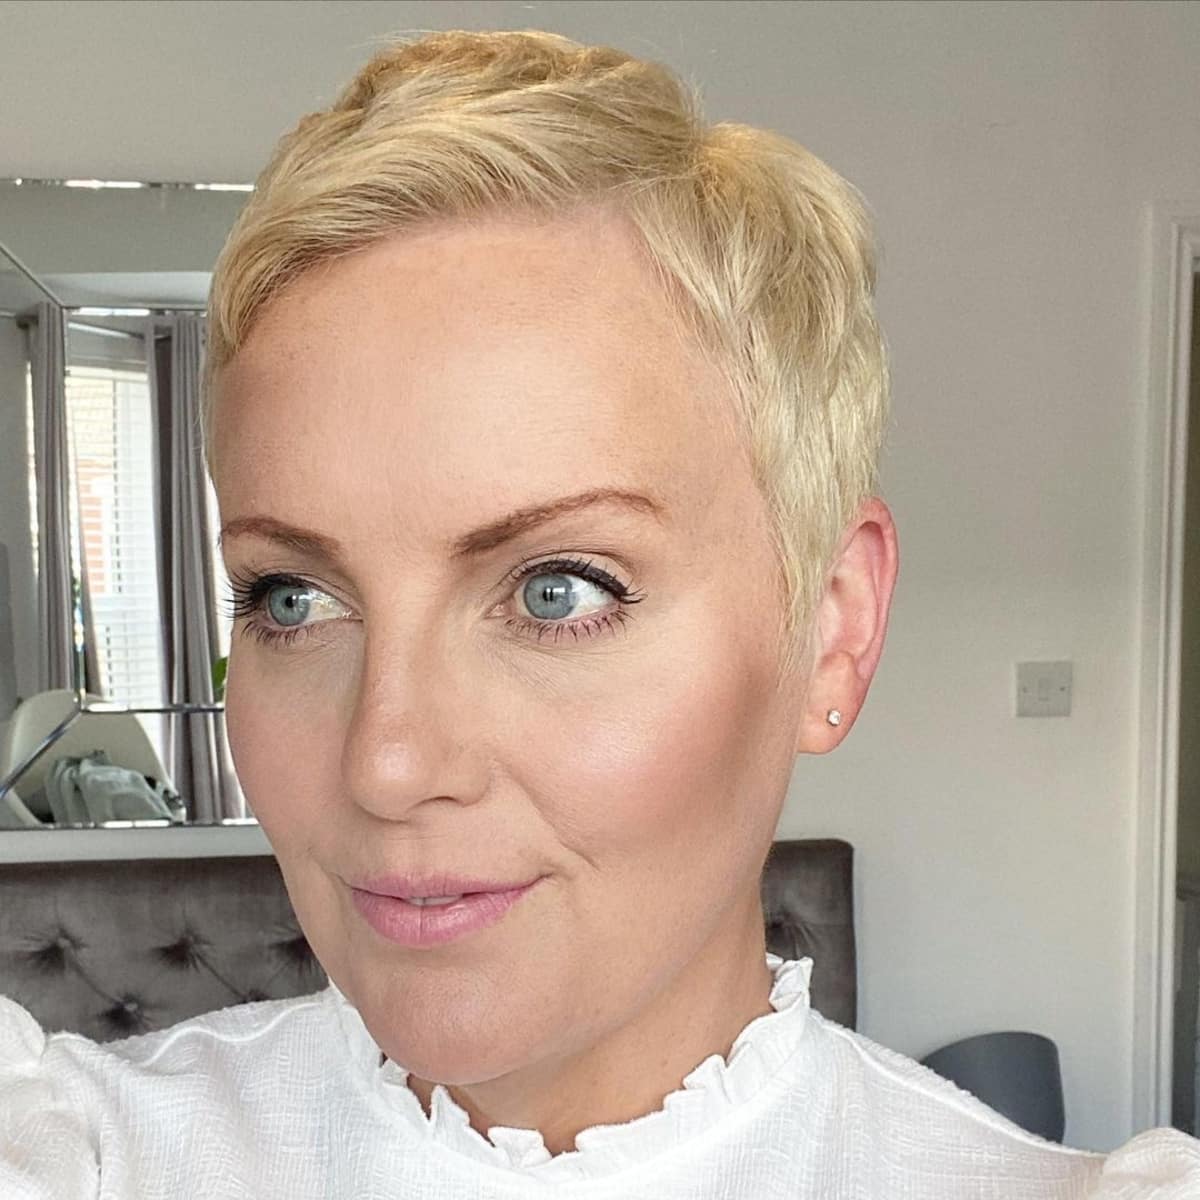 43 Eye-Catching Blonde Pixie Cut Ideas to Show Your Stylist